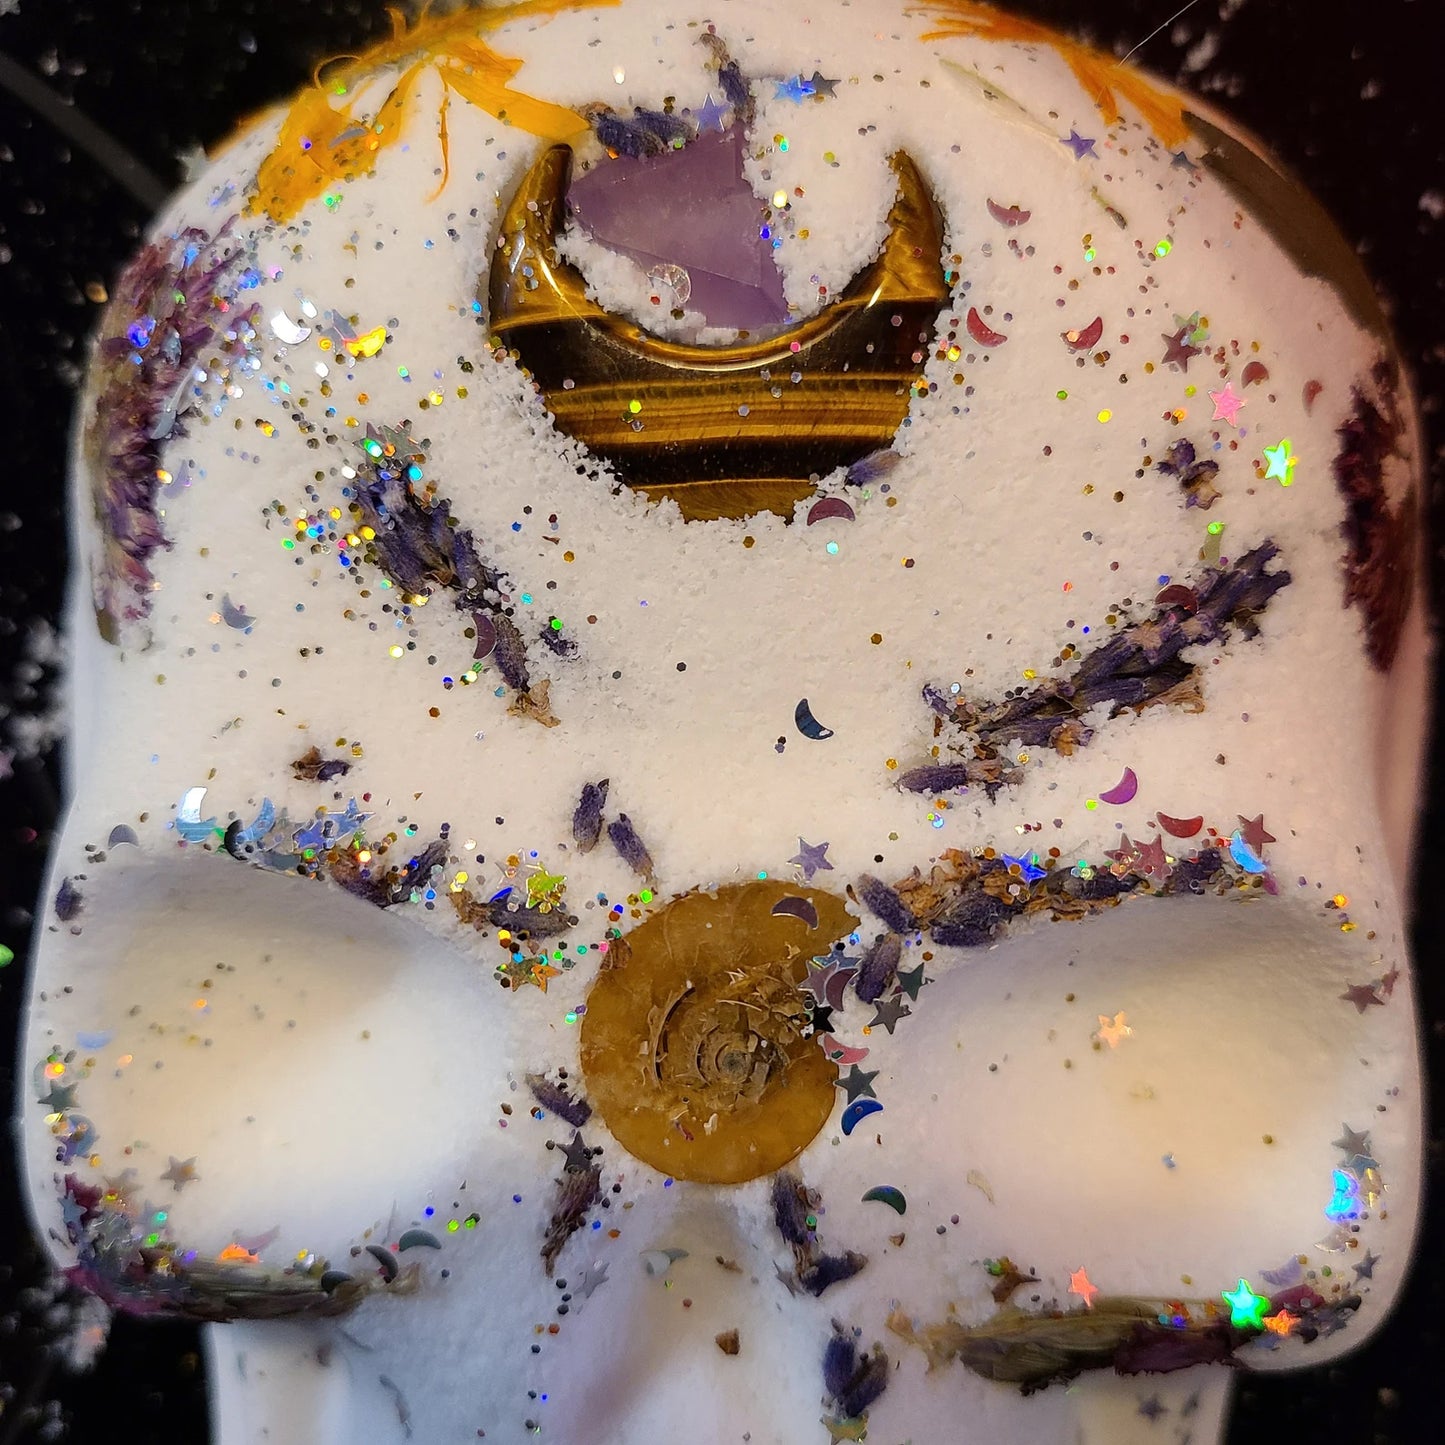 GIANT Prize Bomb Skull Organic Coconut Oil with Oregon Lavender Essential Oil Bath bombs by The Fizz Wizard